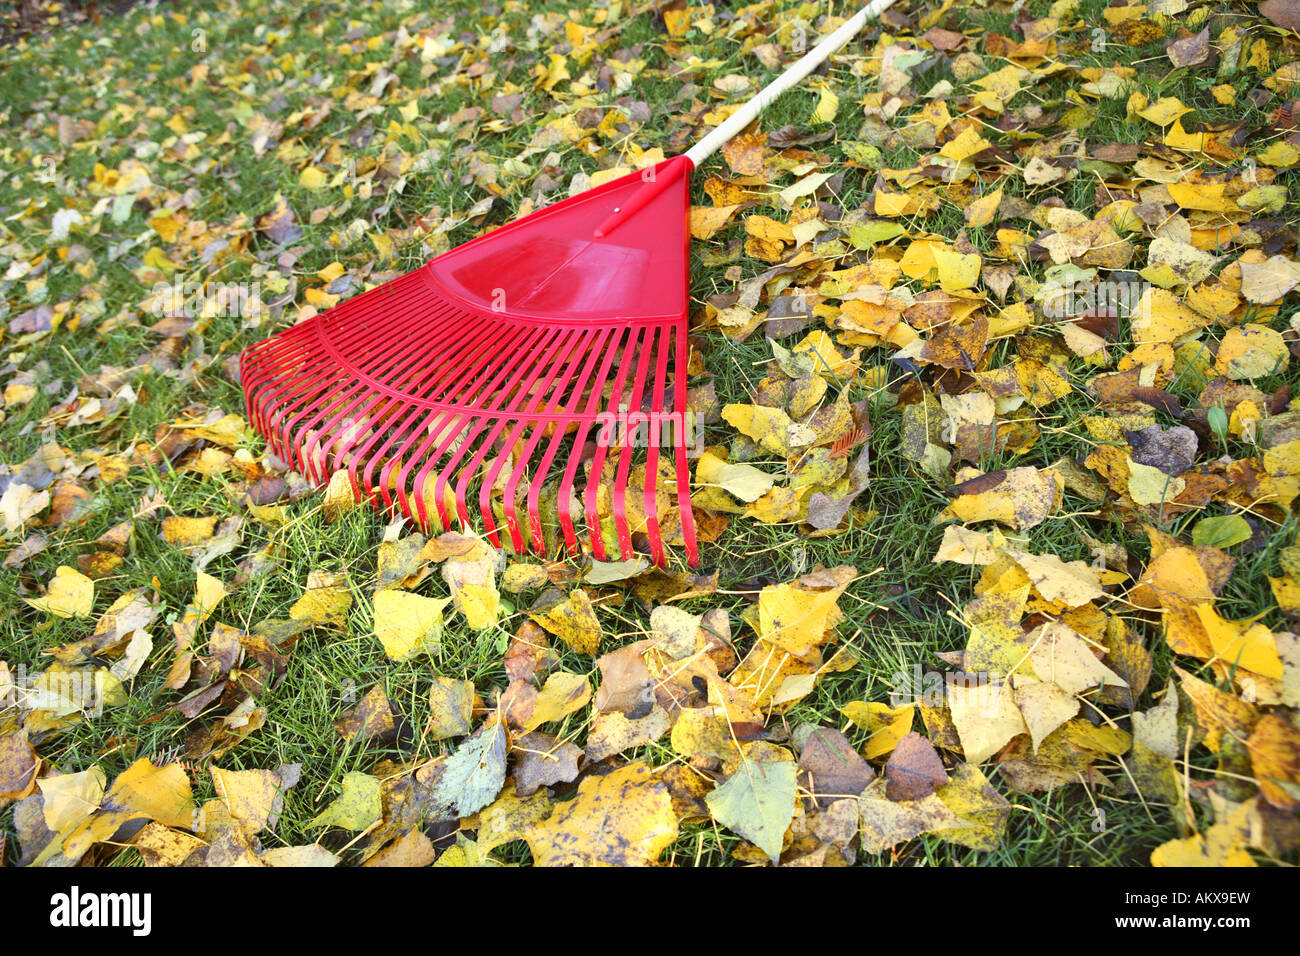 Rake laying in leaf covered lawn Stock Photo - Alamy